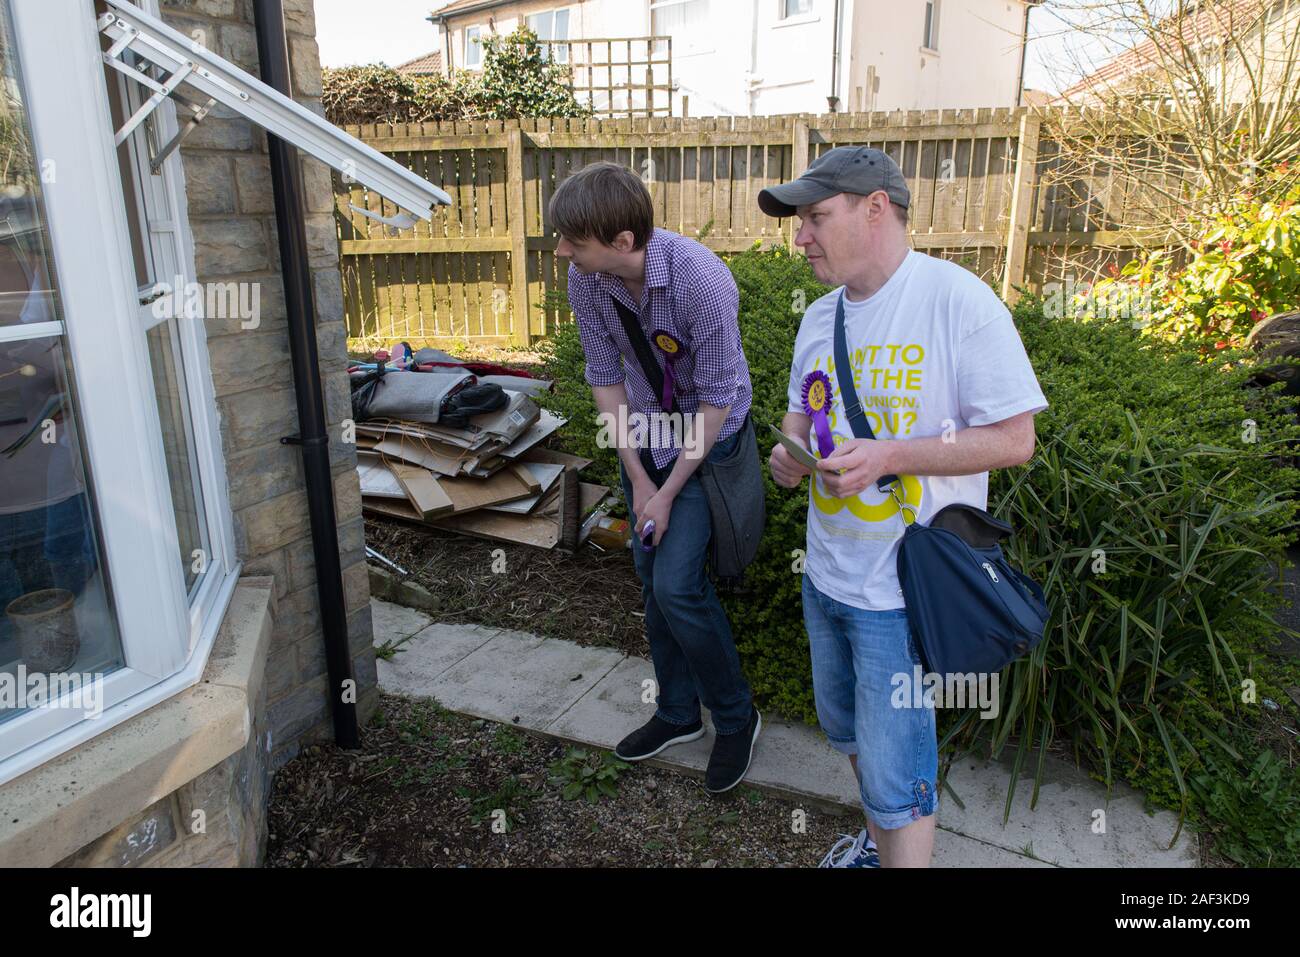 Jason Smith (with purple jacket) is UKIP representative canvassing with a team from UKIP, Queensbury neighbourhood, Bradford. Stock Photo